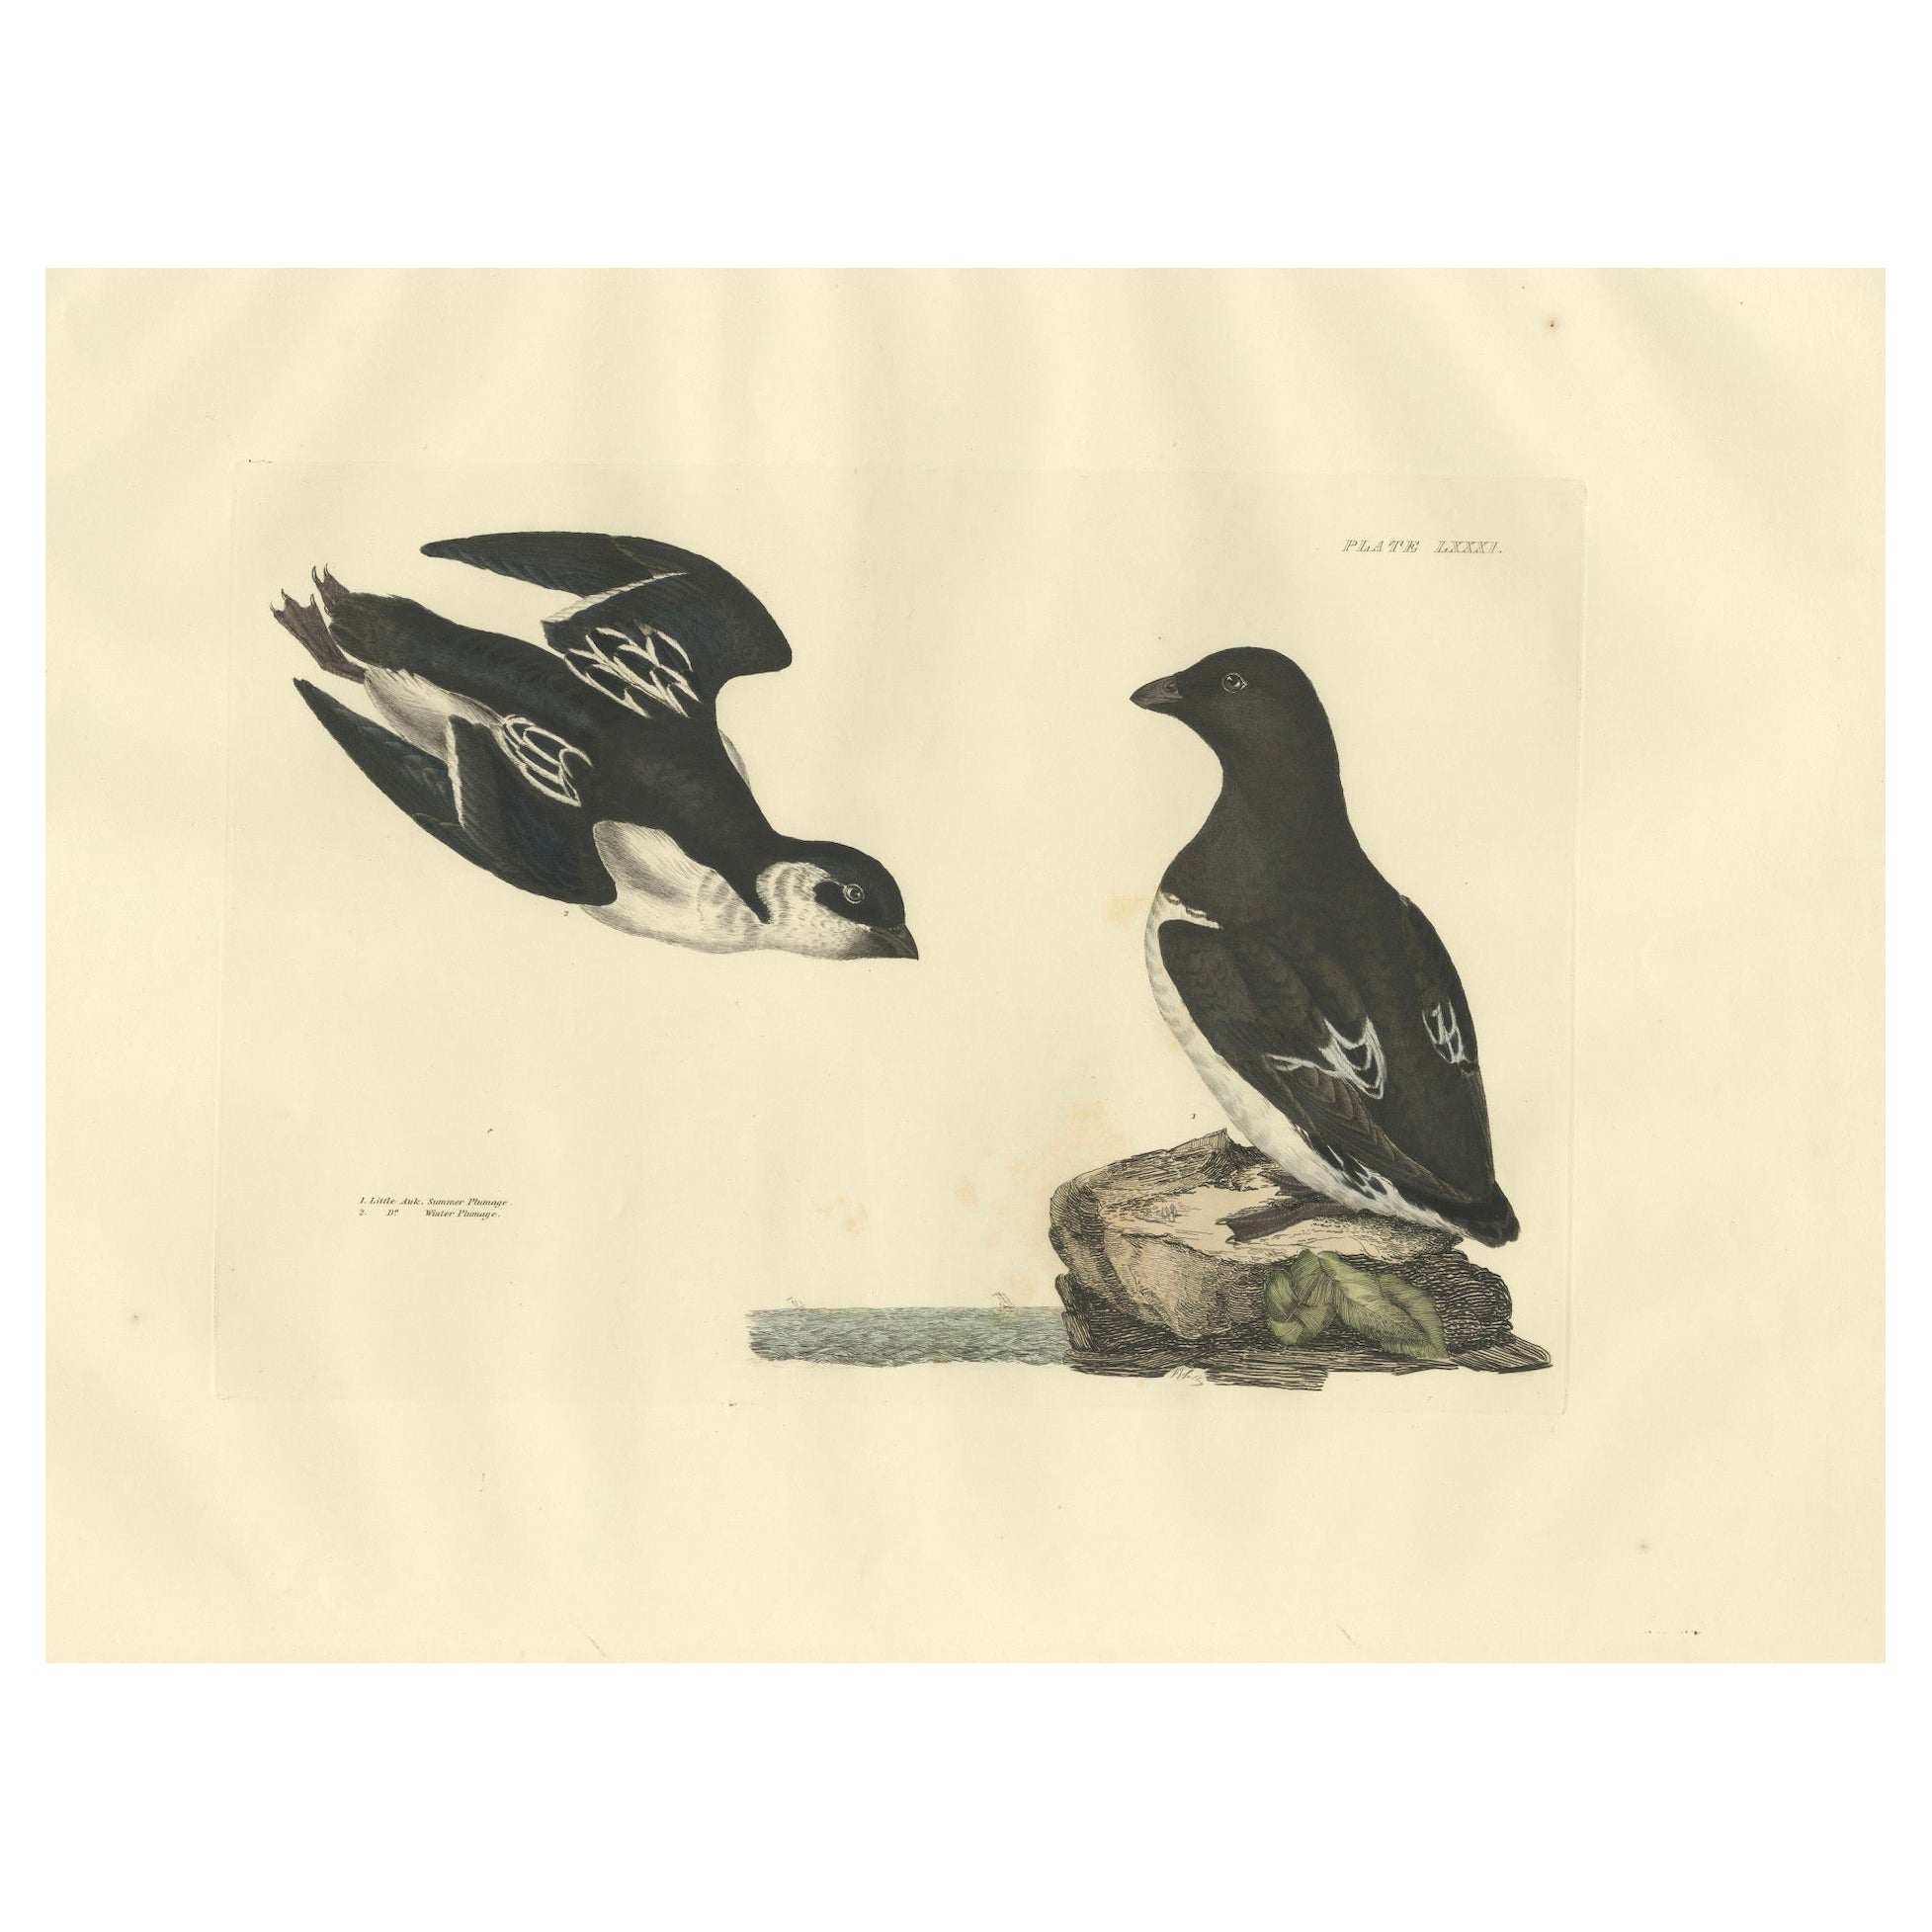 The Little Auk - A Life Seize Study Engraved in Seasonal Plumage by Selby, 1826 For Sale